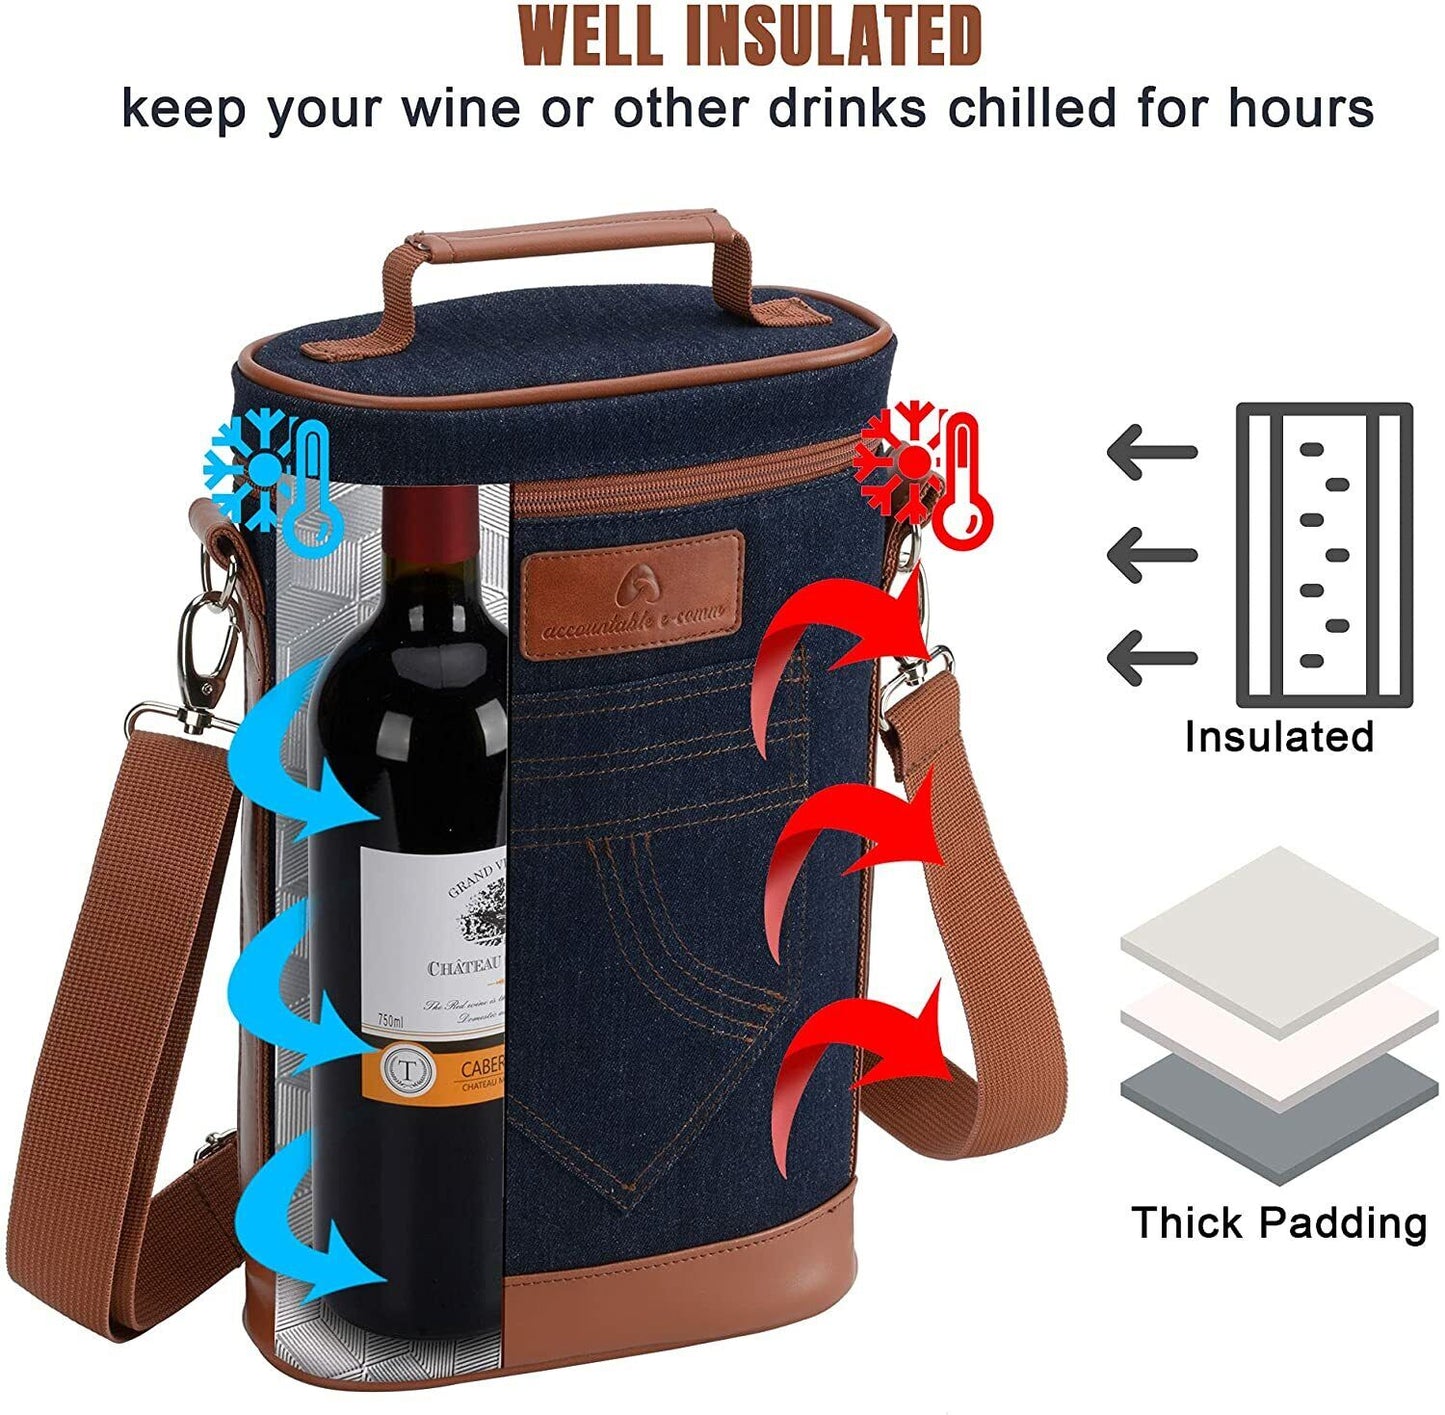 New in Package Jean Wine Carrier Tote Bag - 2-Bottle Insulated Cooler with